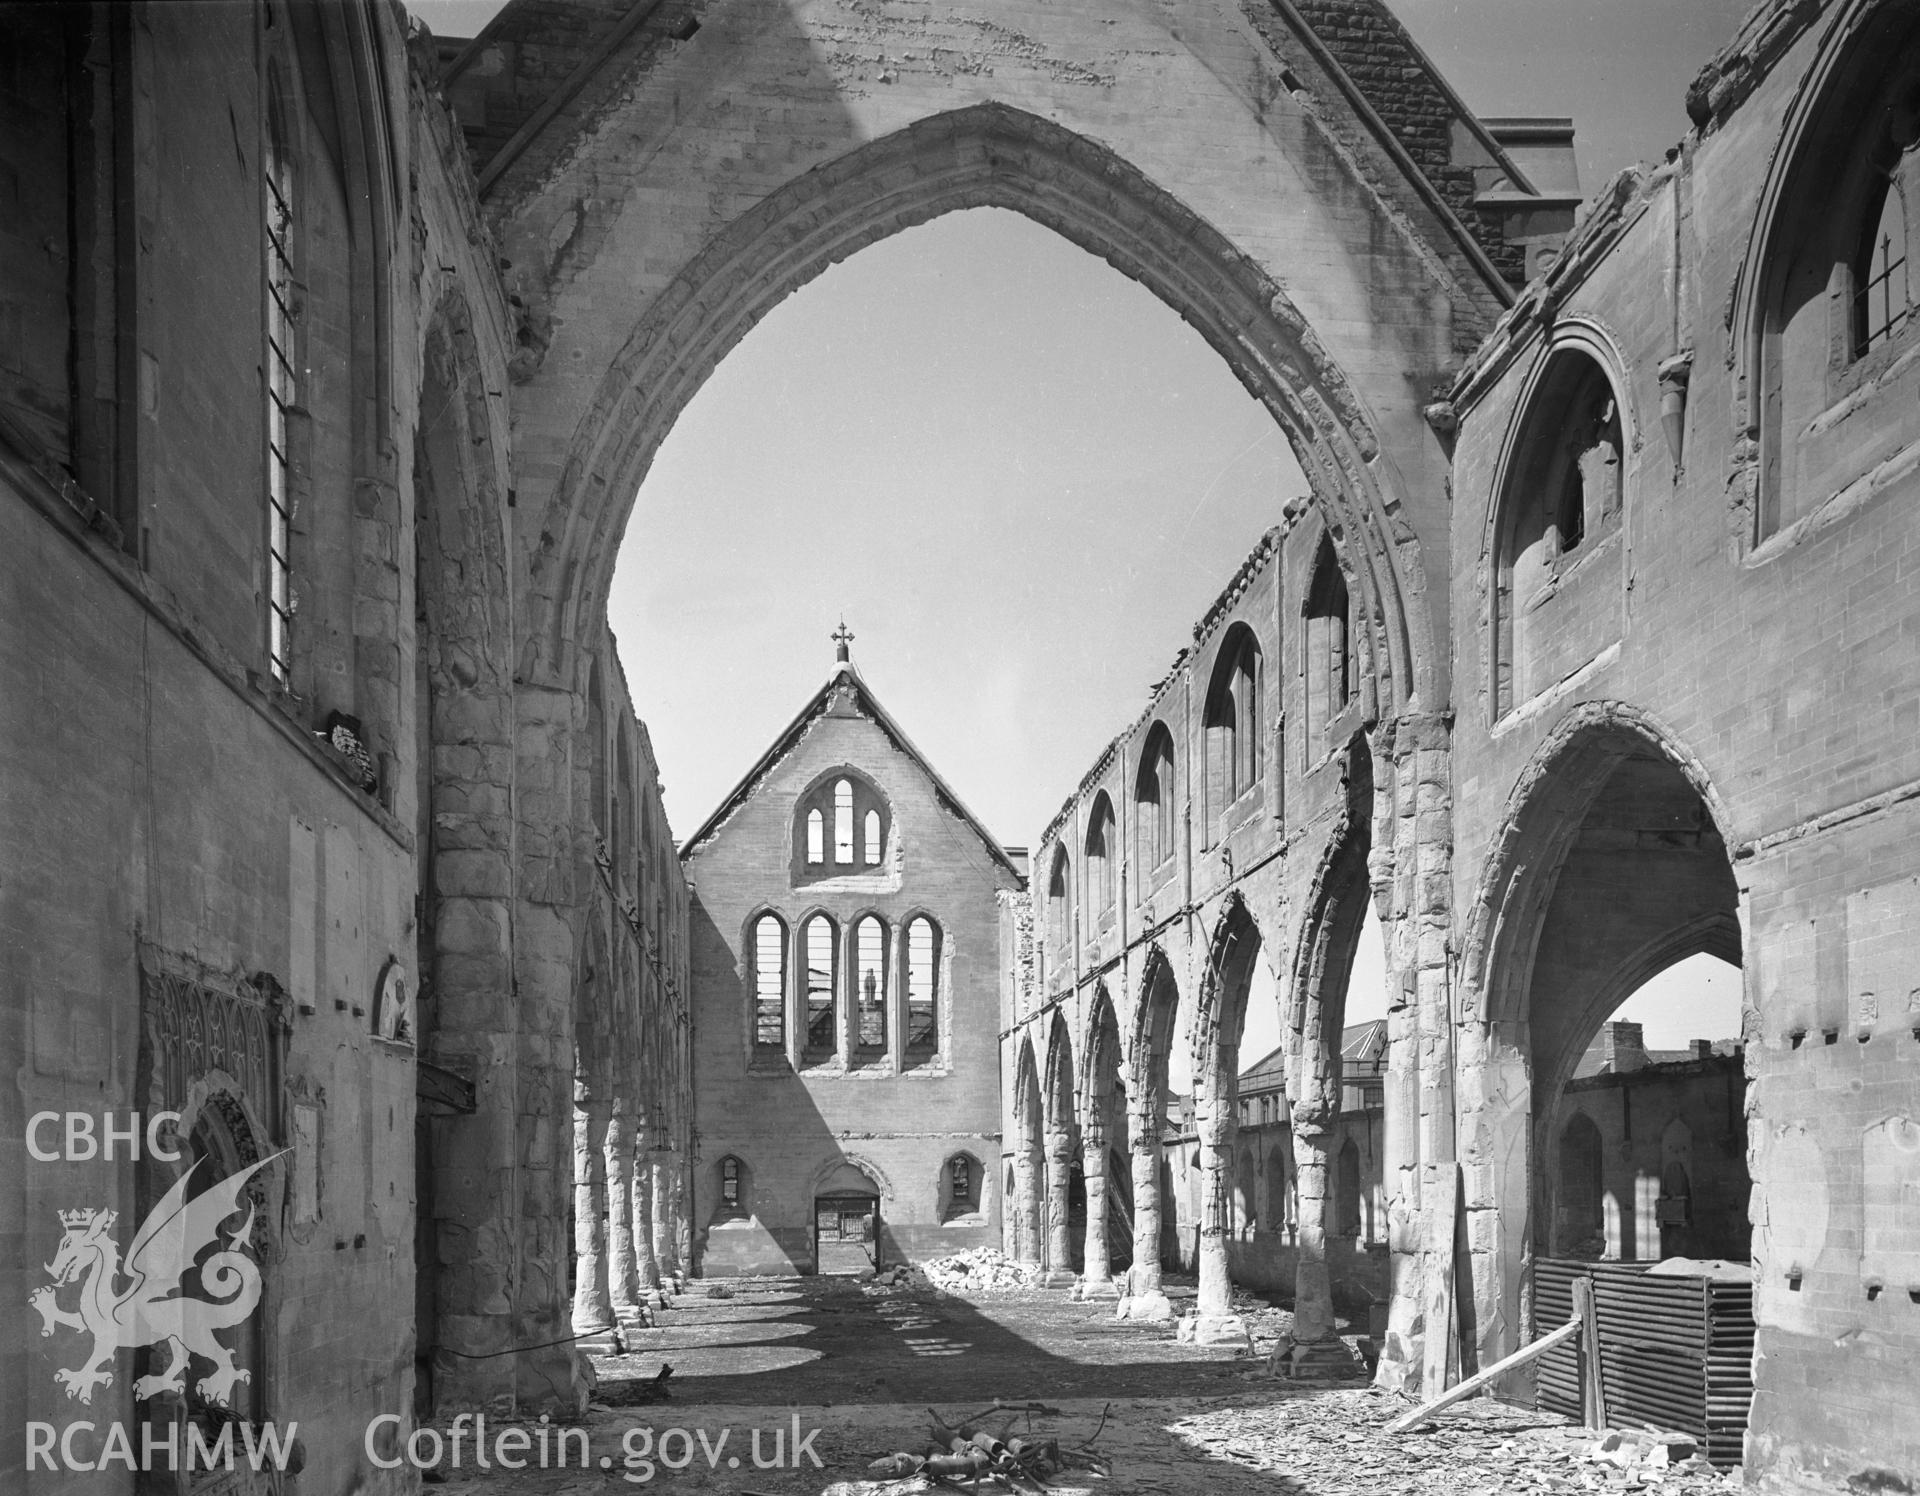 Interior view looking west showing damage to the church caused by enemy action taken in June 1941